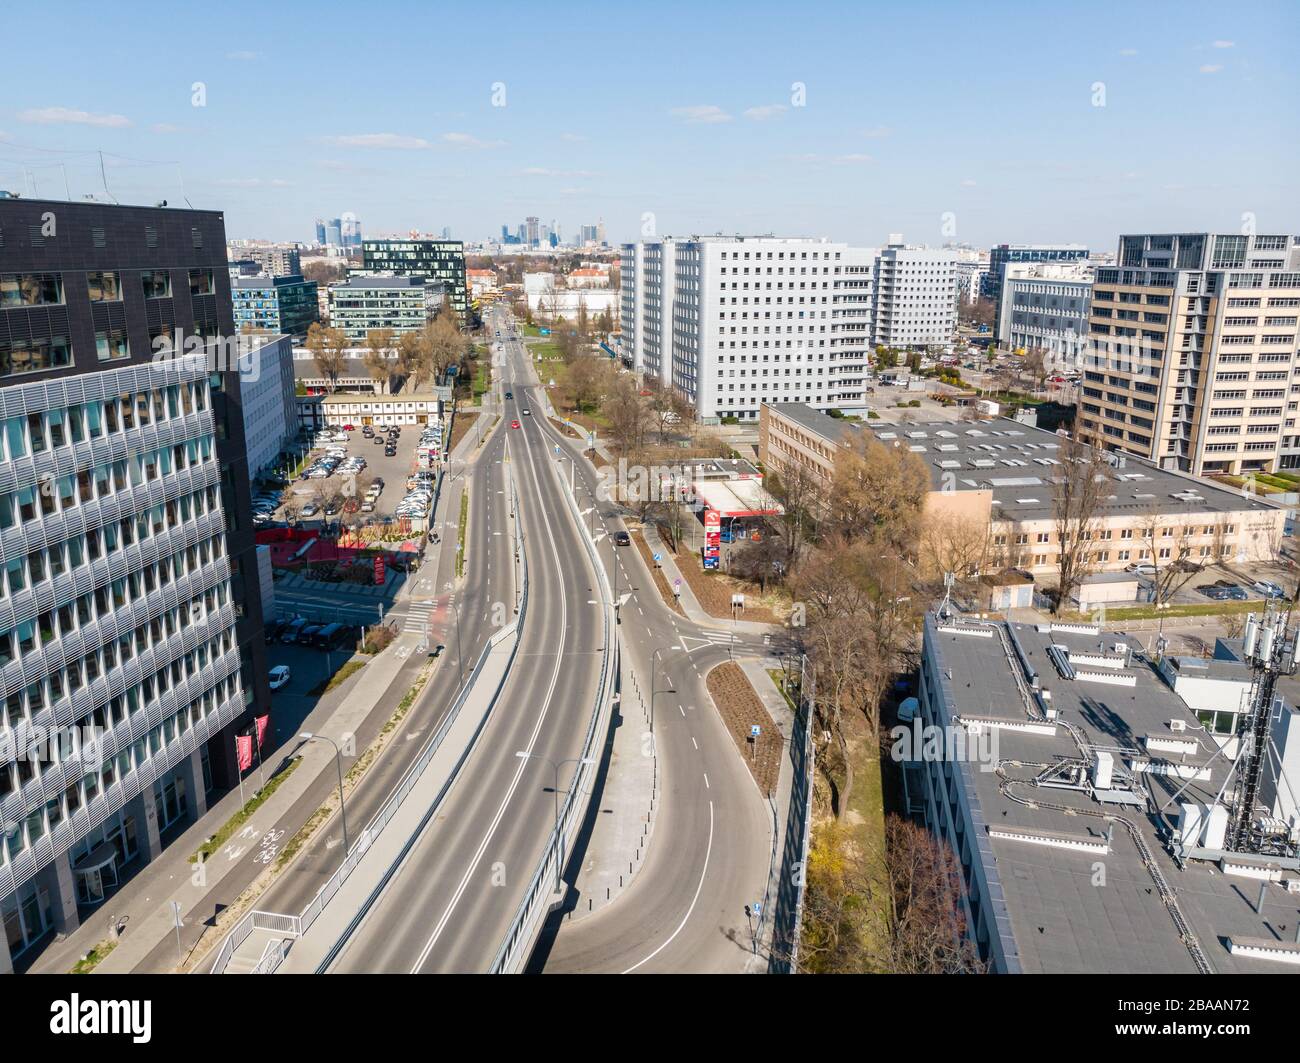 Warsaw, Poland - march 23 2020: empty streets of Warsaw, capial of Poland during coronavirus pandemic Stock Photo